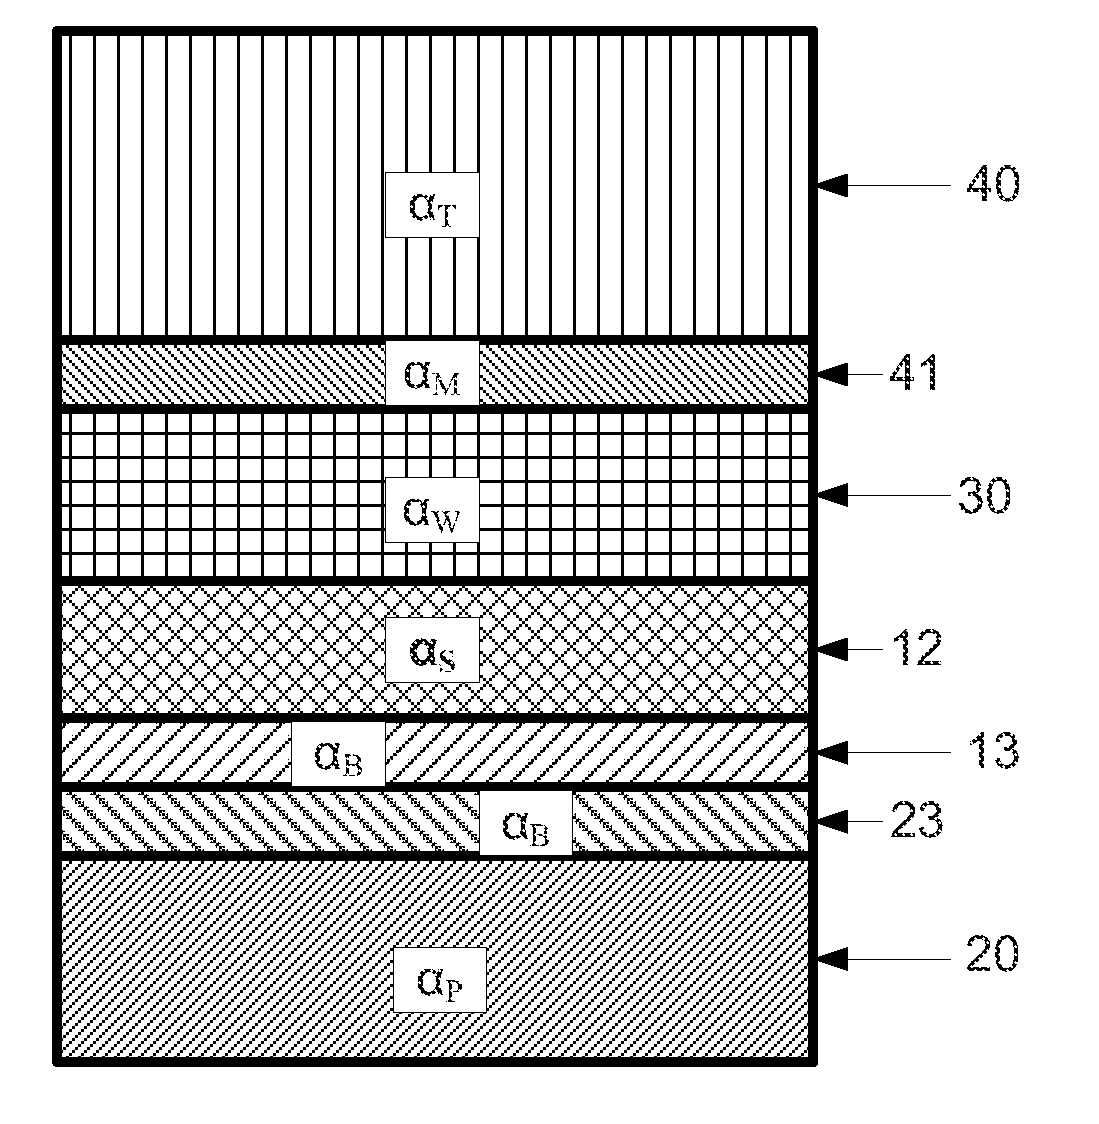 Fabrication of substrates with a useful layer of monocrystalline semiconductor material